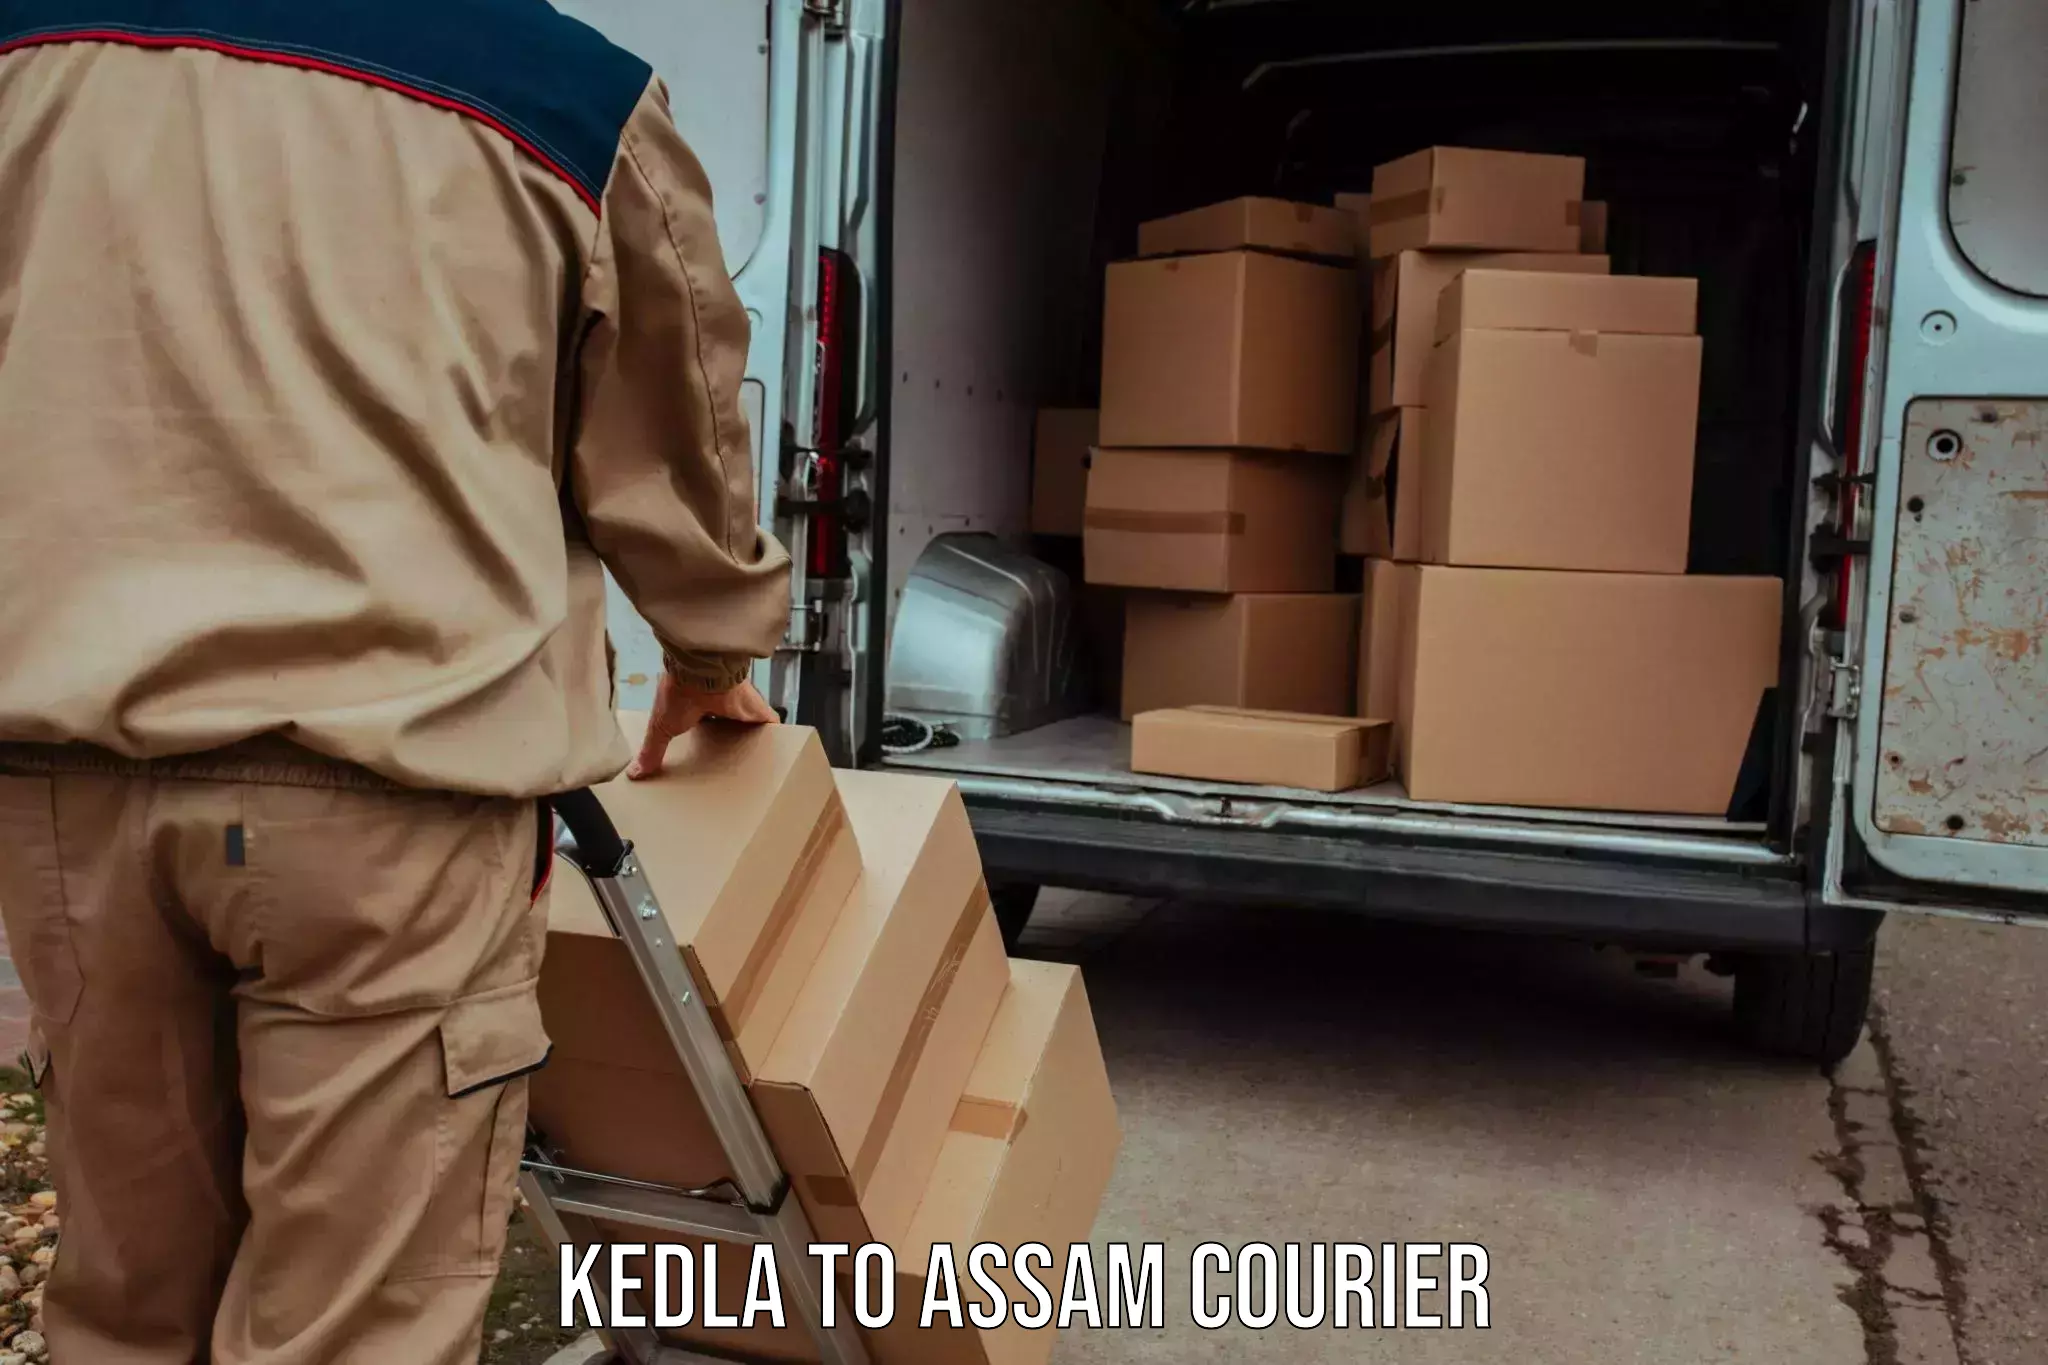 Easy access courier services Kedla to Lala Assam